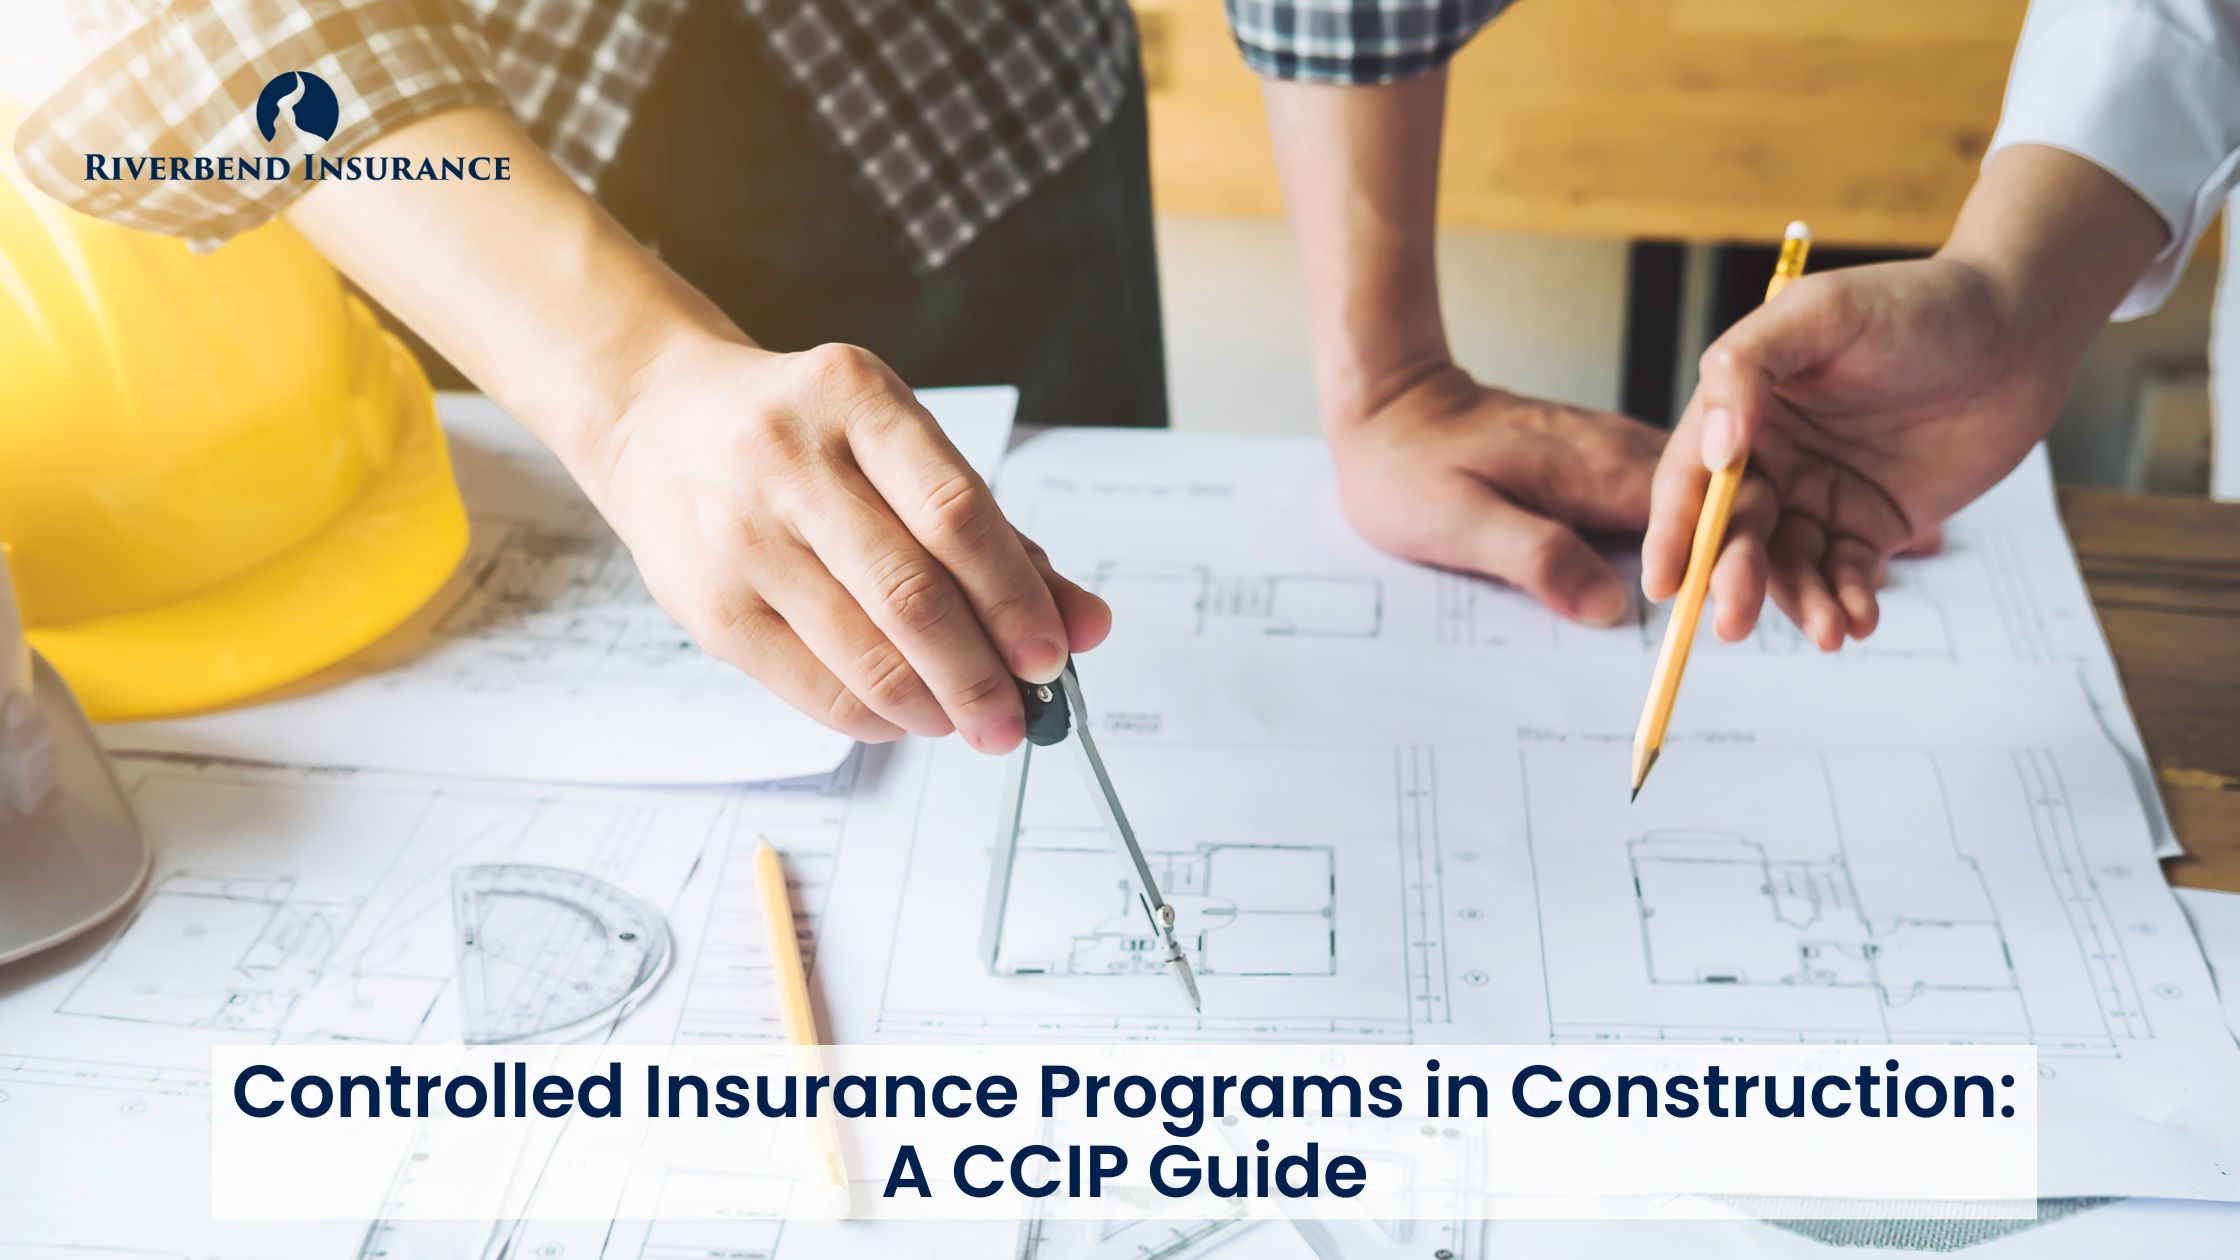 Controlled Insurance Programs in Construction: A CCIP Guide